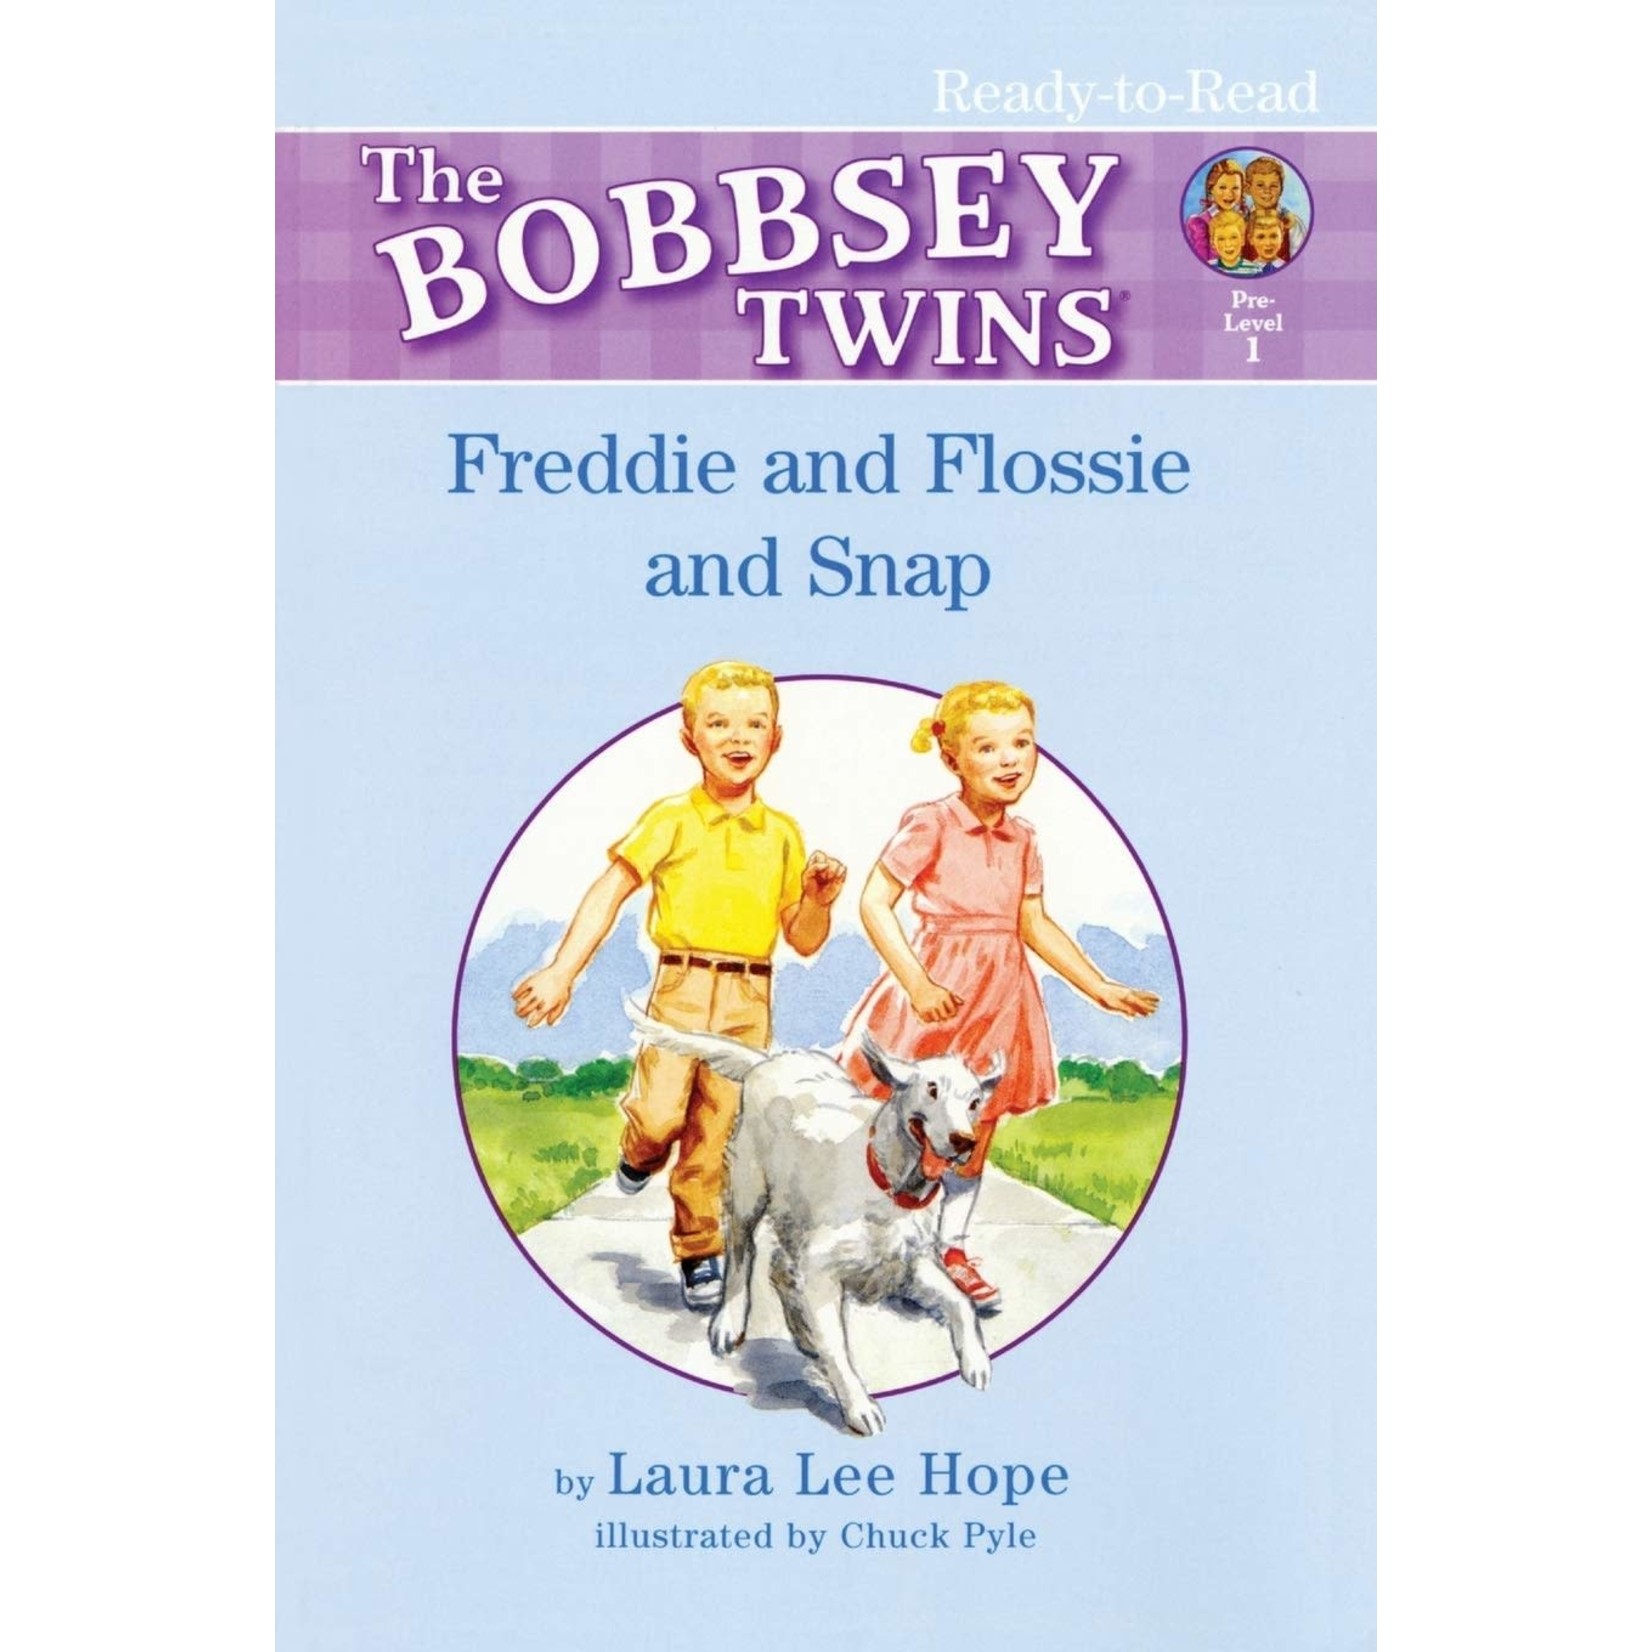 Laura Lee Hope The Bobbsey Twins  Freddie and Flossie and Snap - Ready to Read 1